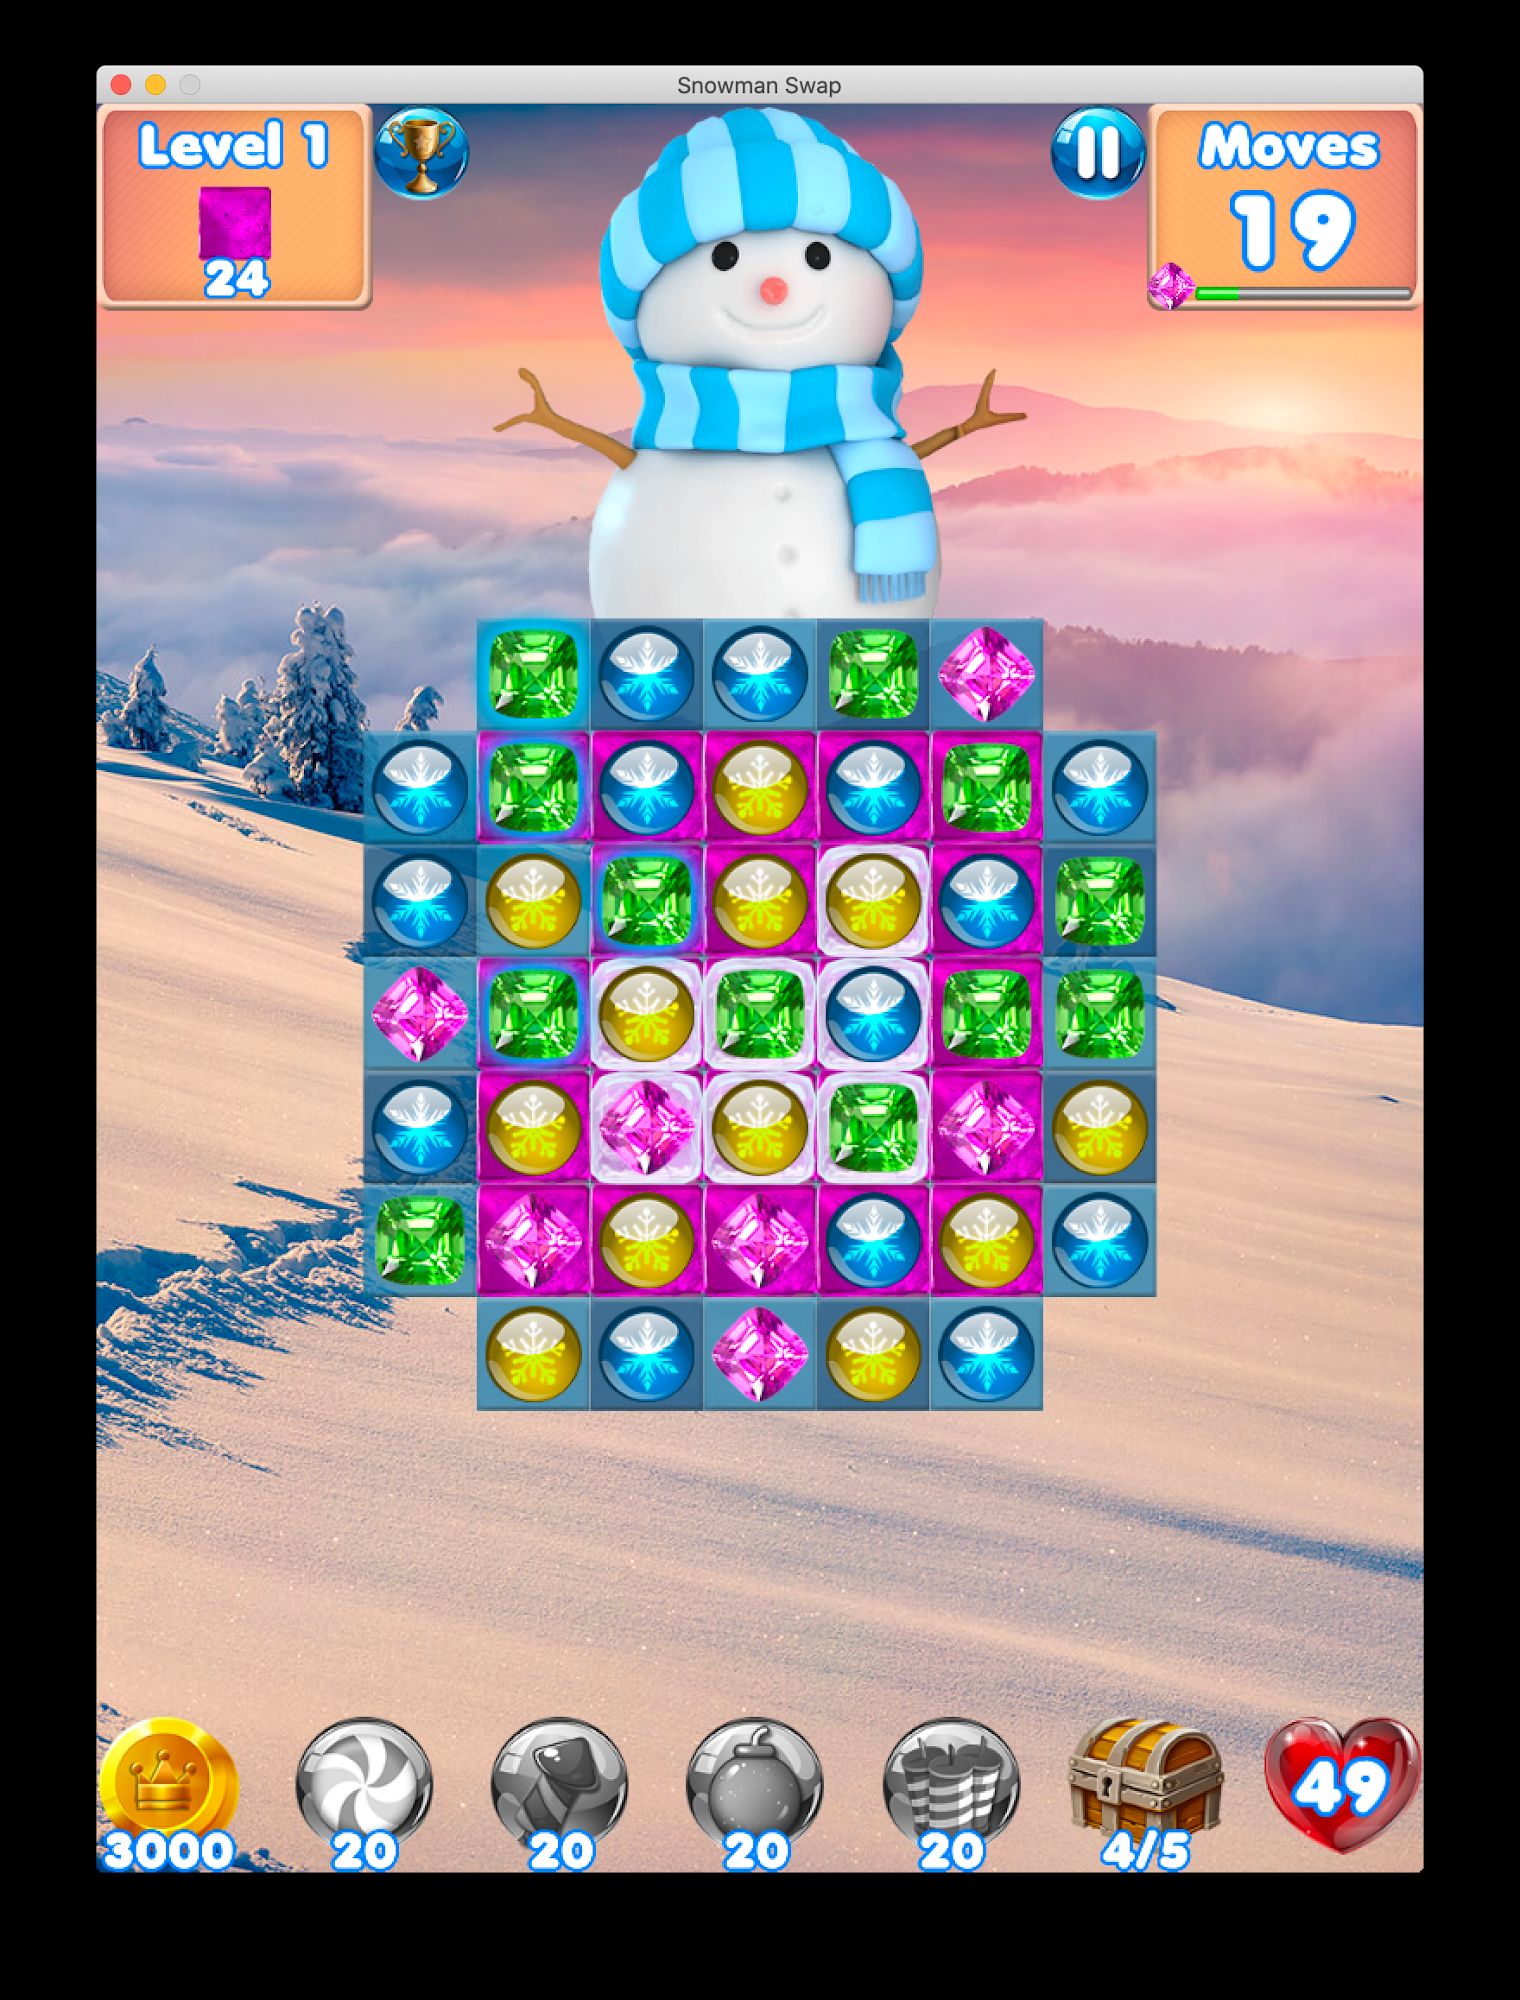 Download Snowman Swap - match 3 games and Christmas Games für Android kostenlos.